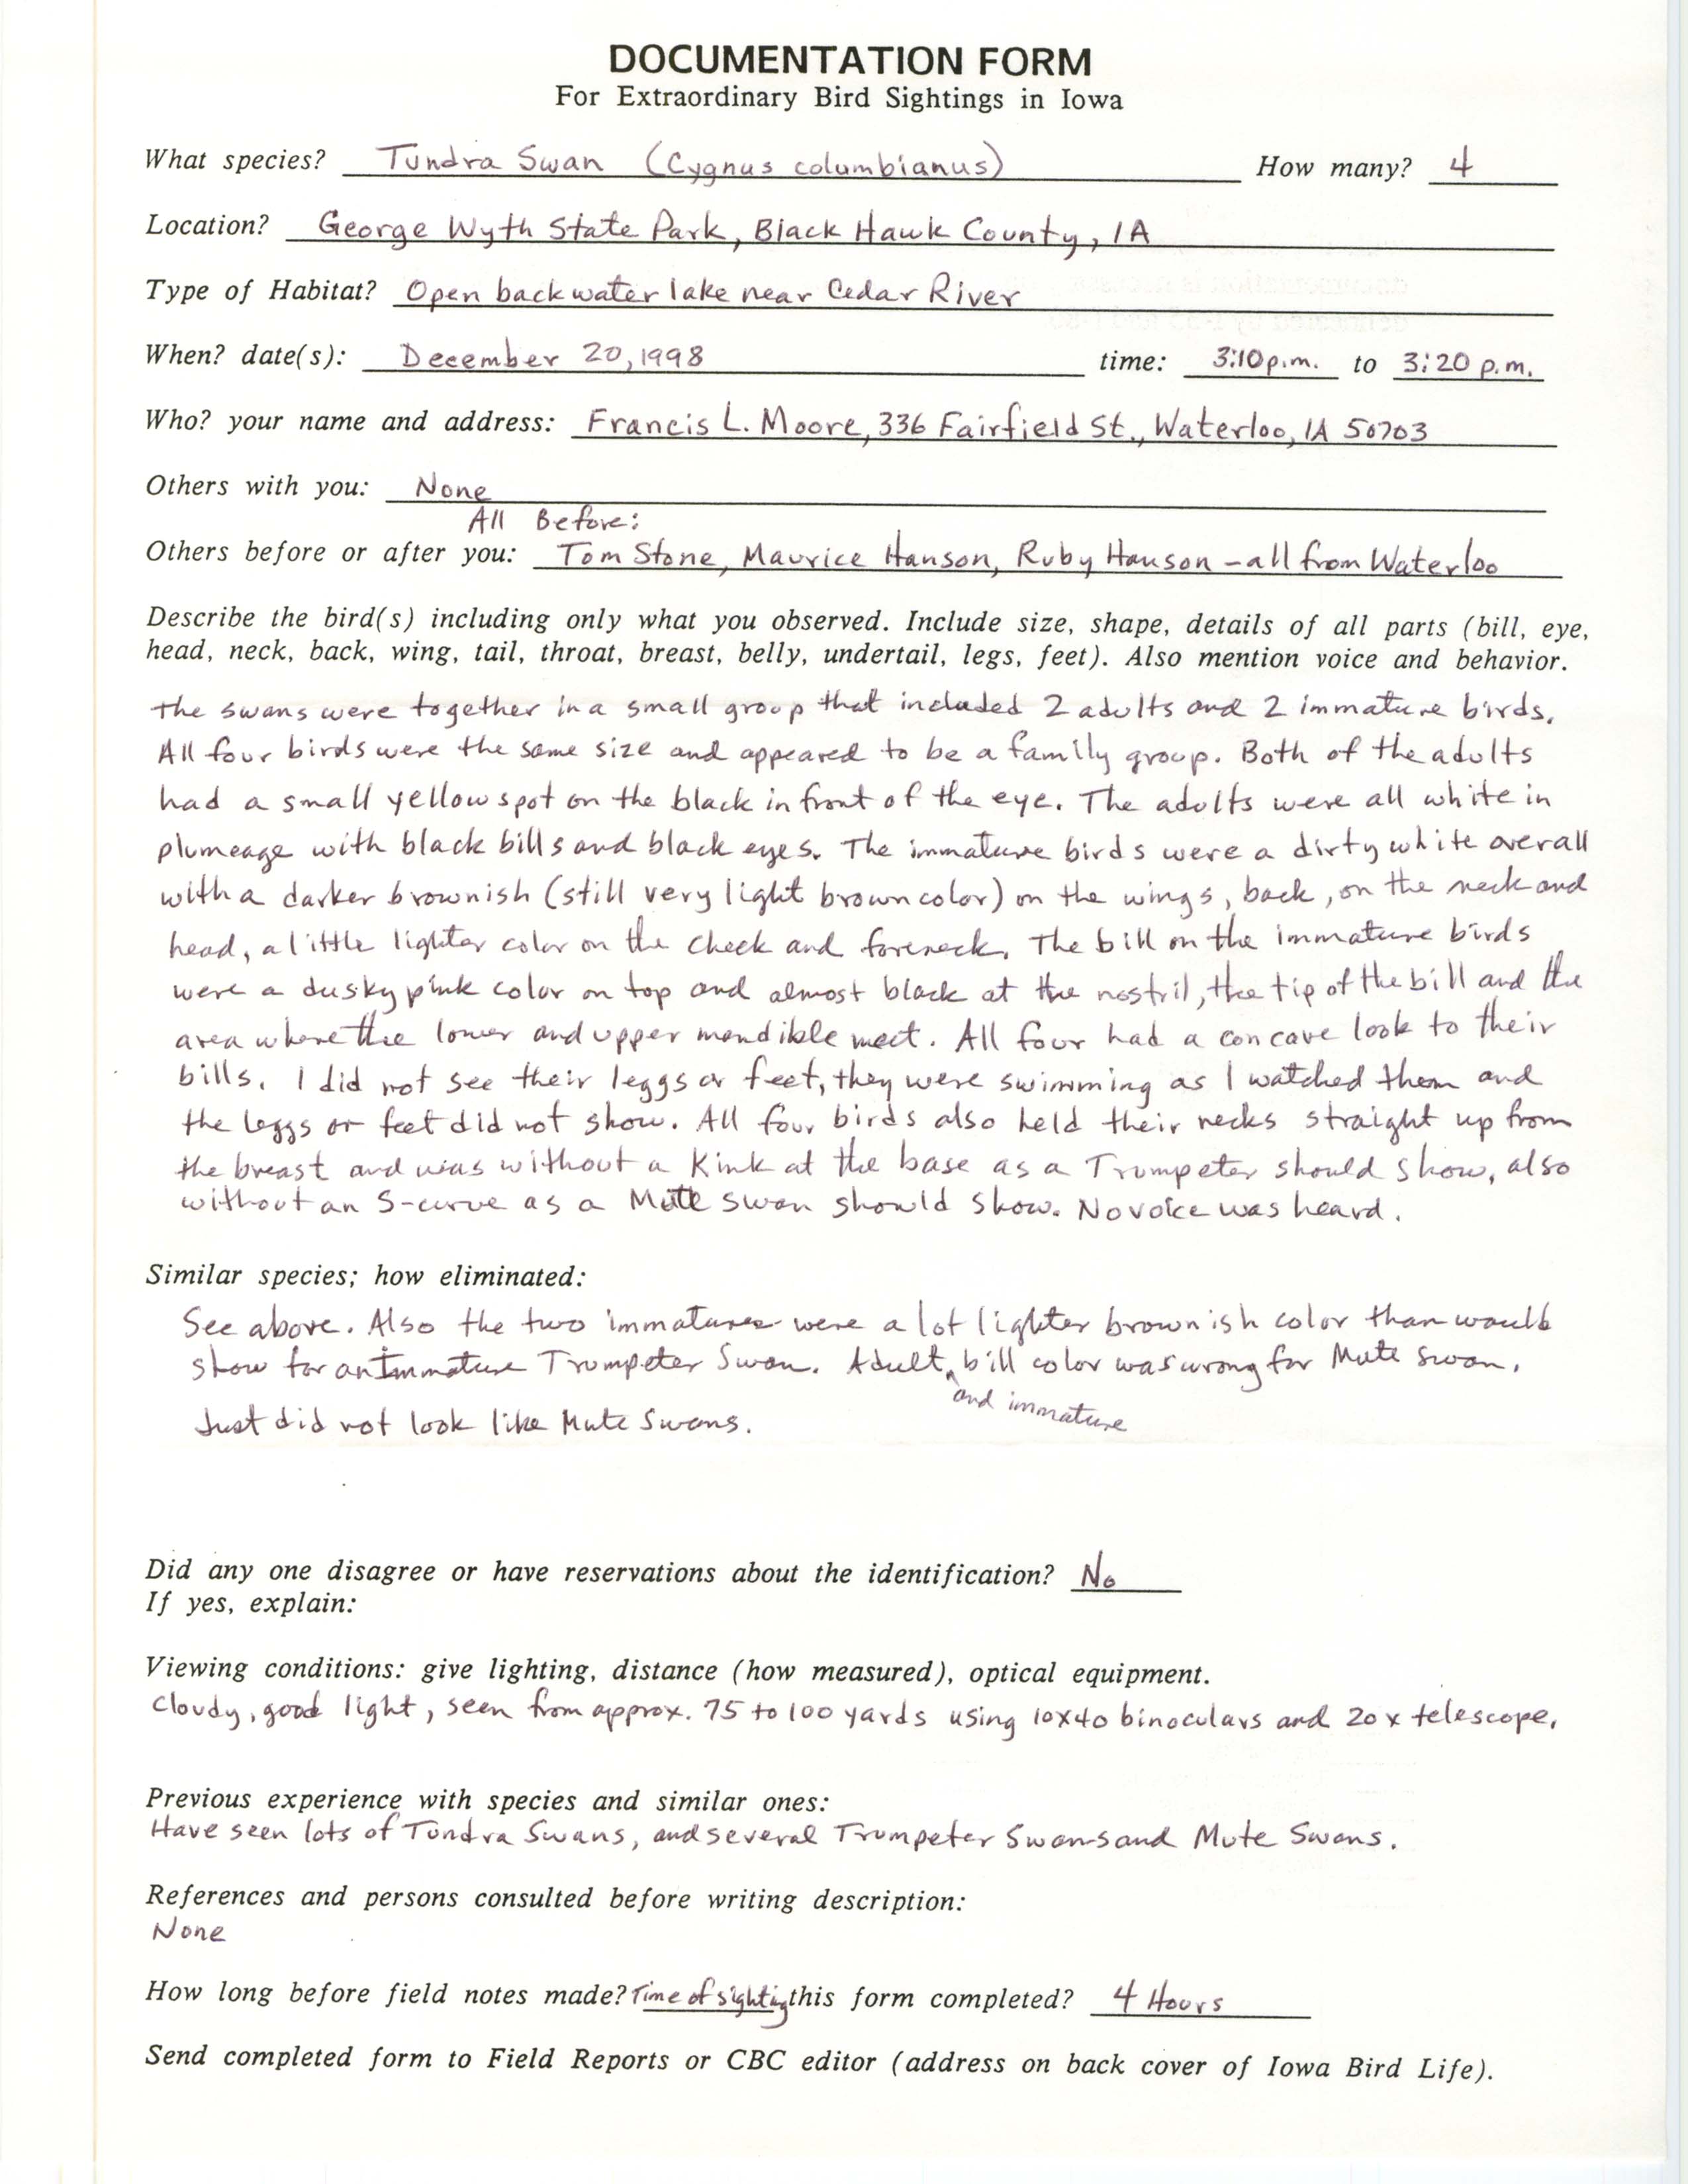 Rare bird documentation form for Tundra Swan at George Wyth State Park, 1998